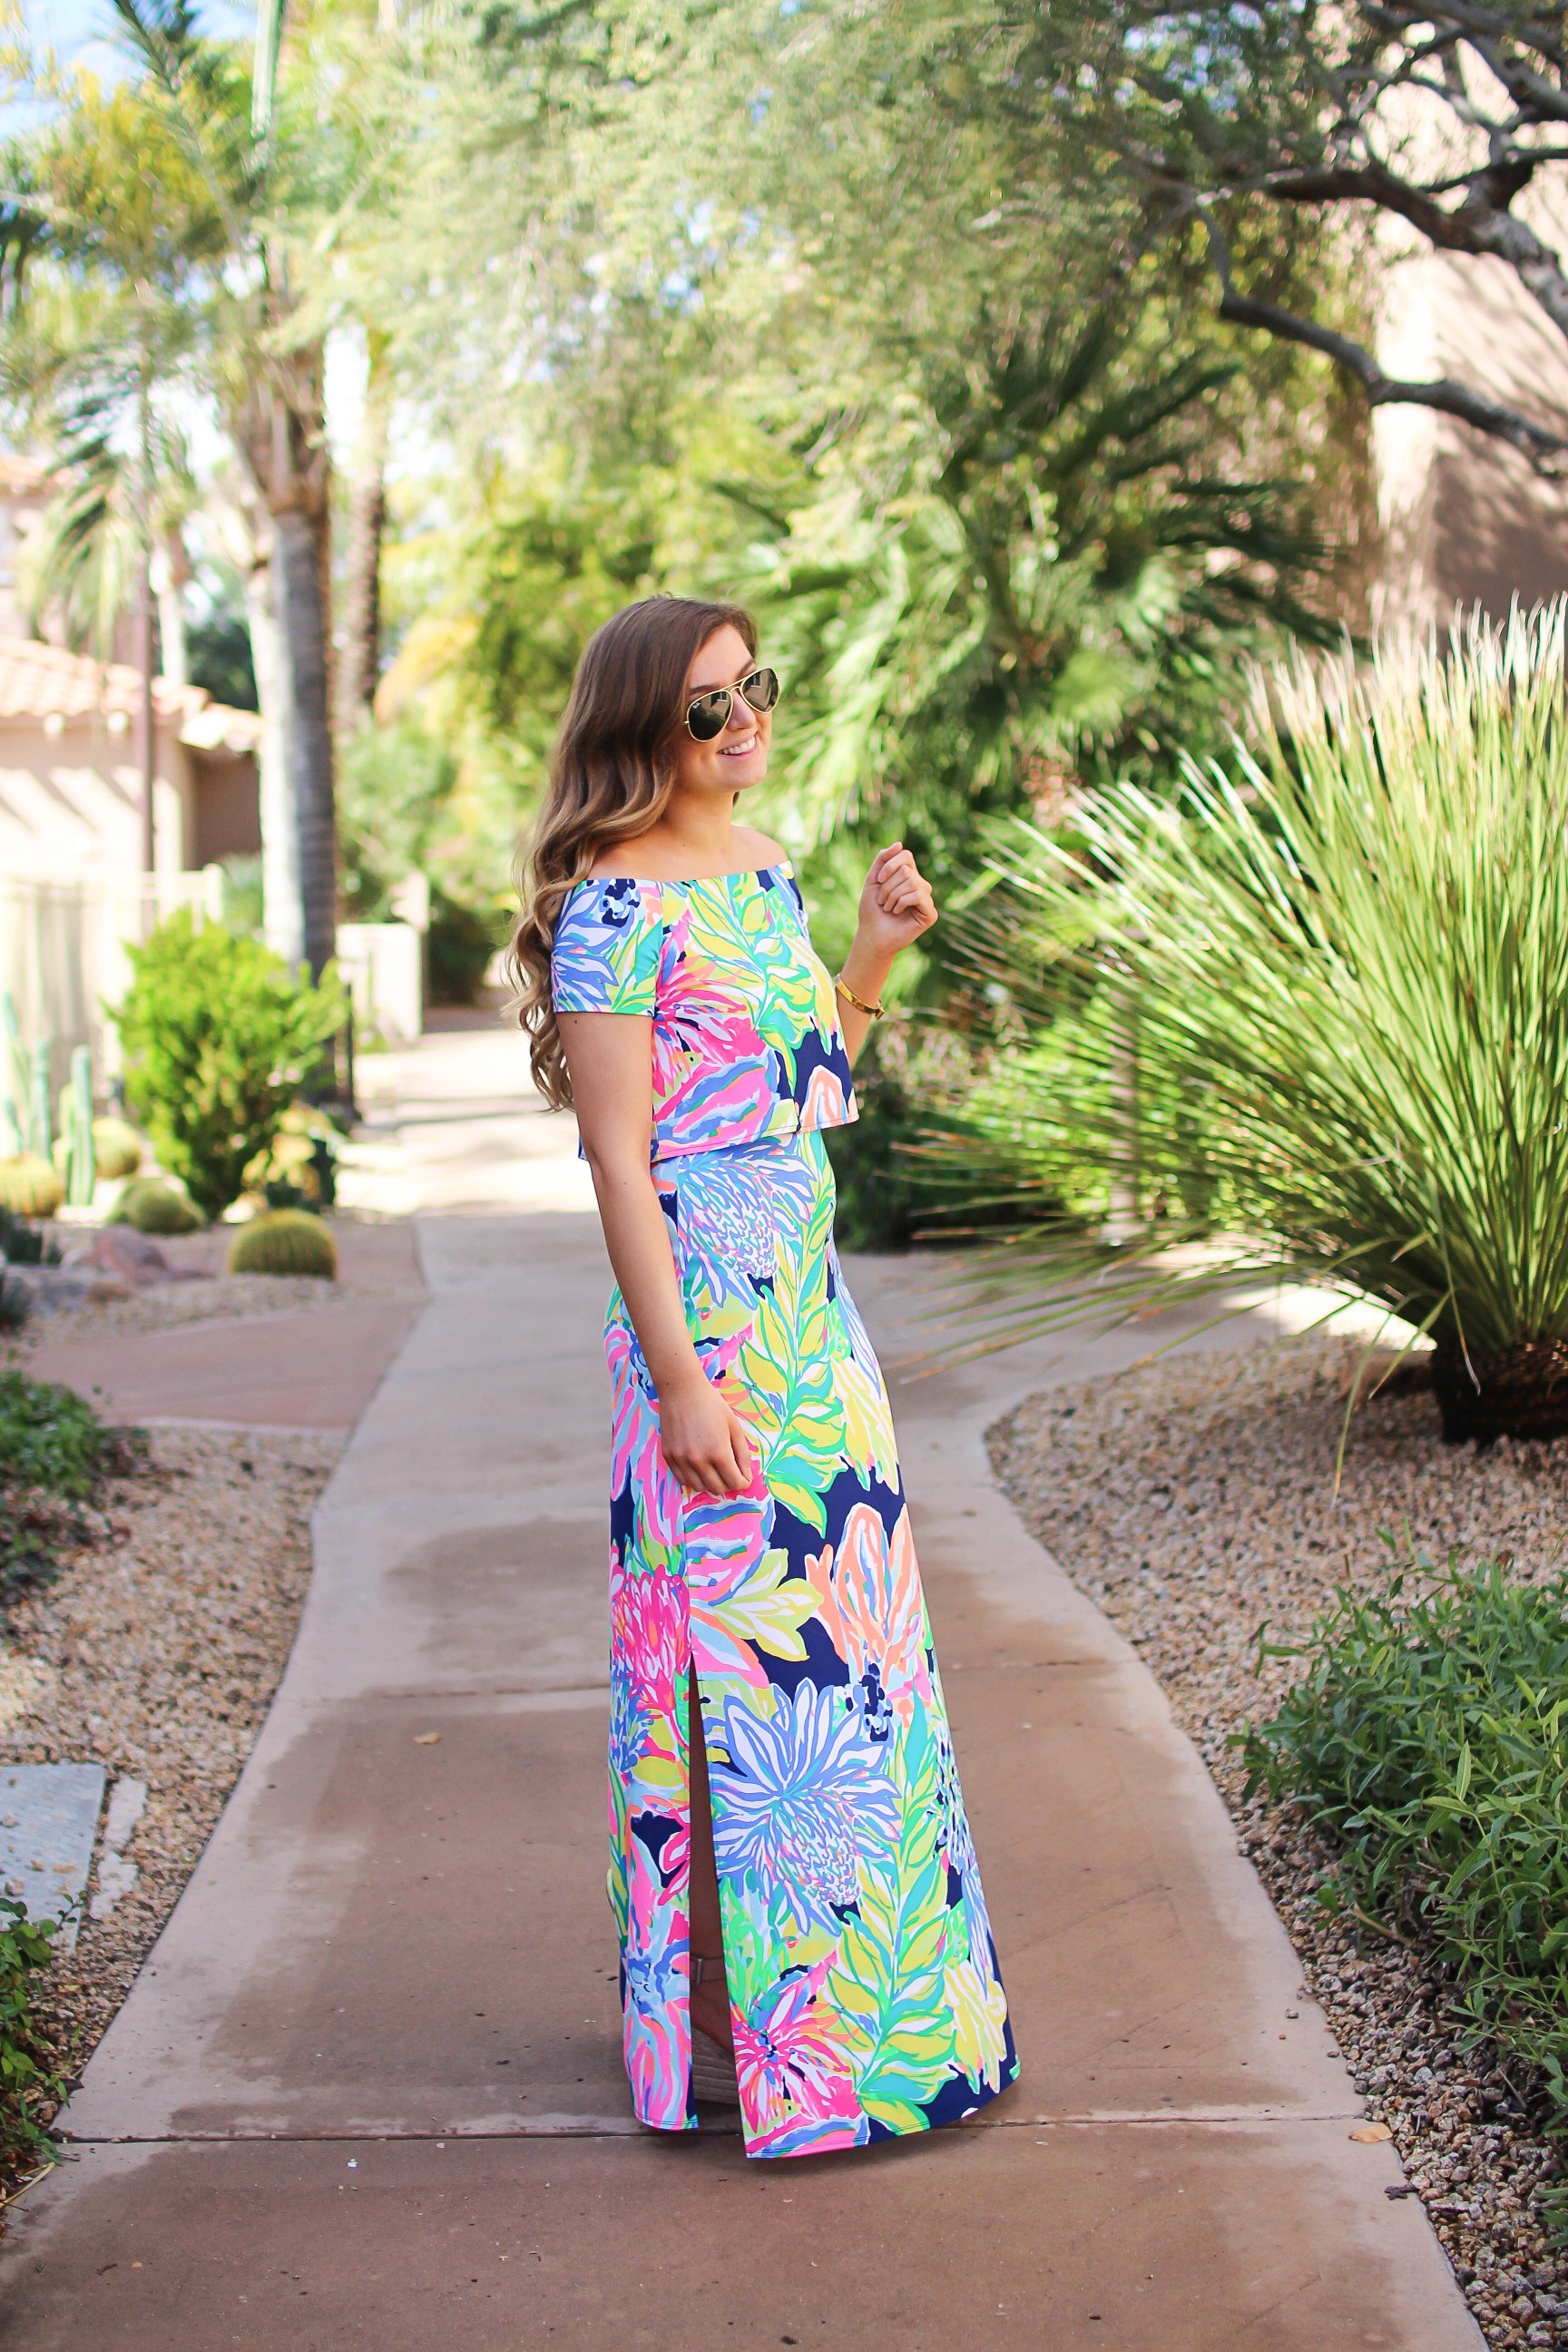 Lilly Pulitzer two piece maxi dress in Navy Travelers Palm. I love everything in the Resort Wear 365 collection this year! I paired this maxi dress with my favorite wedges and gold bangle! By Lauren Lindmark on dailydoseofcharm.com daily dose of charm